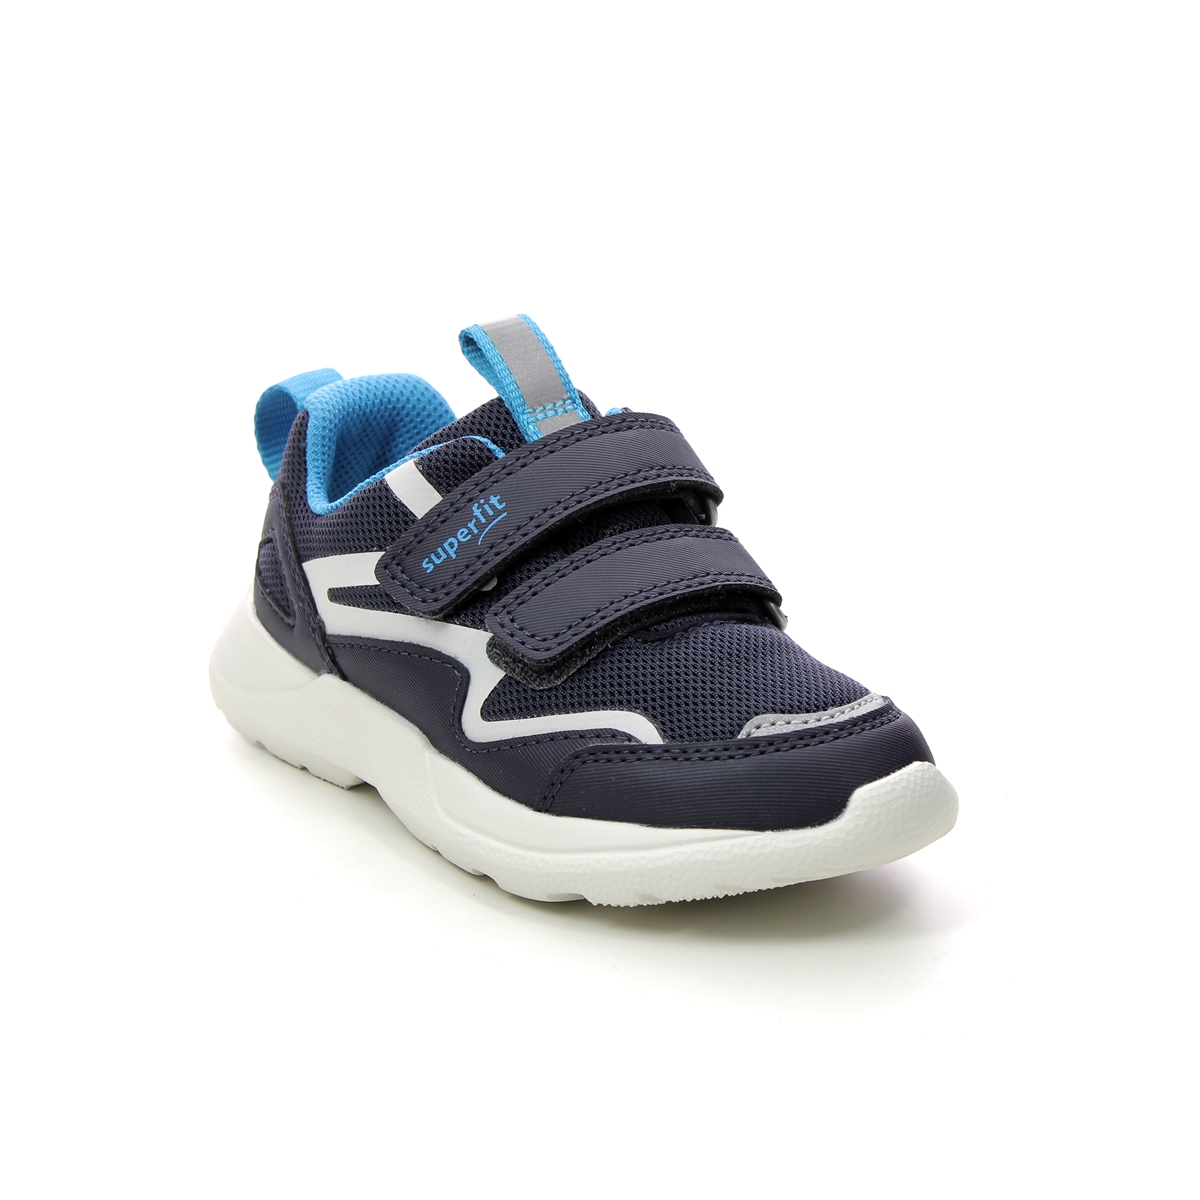 Superfit Rush Mini Navy Kids Trainers 1006206-8000 In Size 28 In Plain Navy For kids